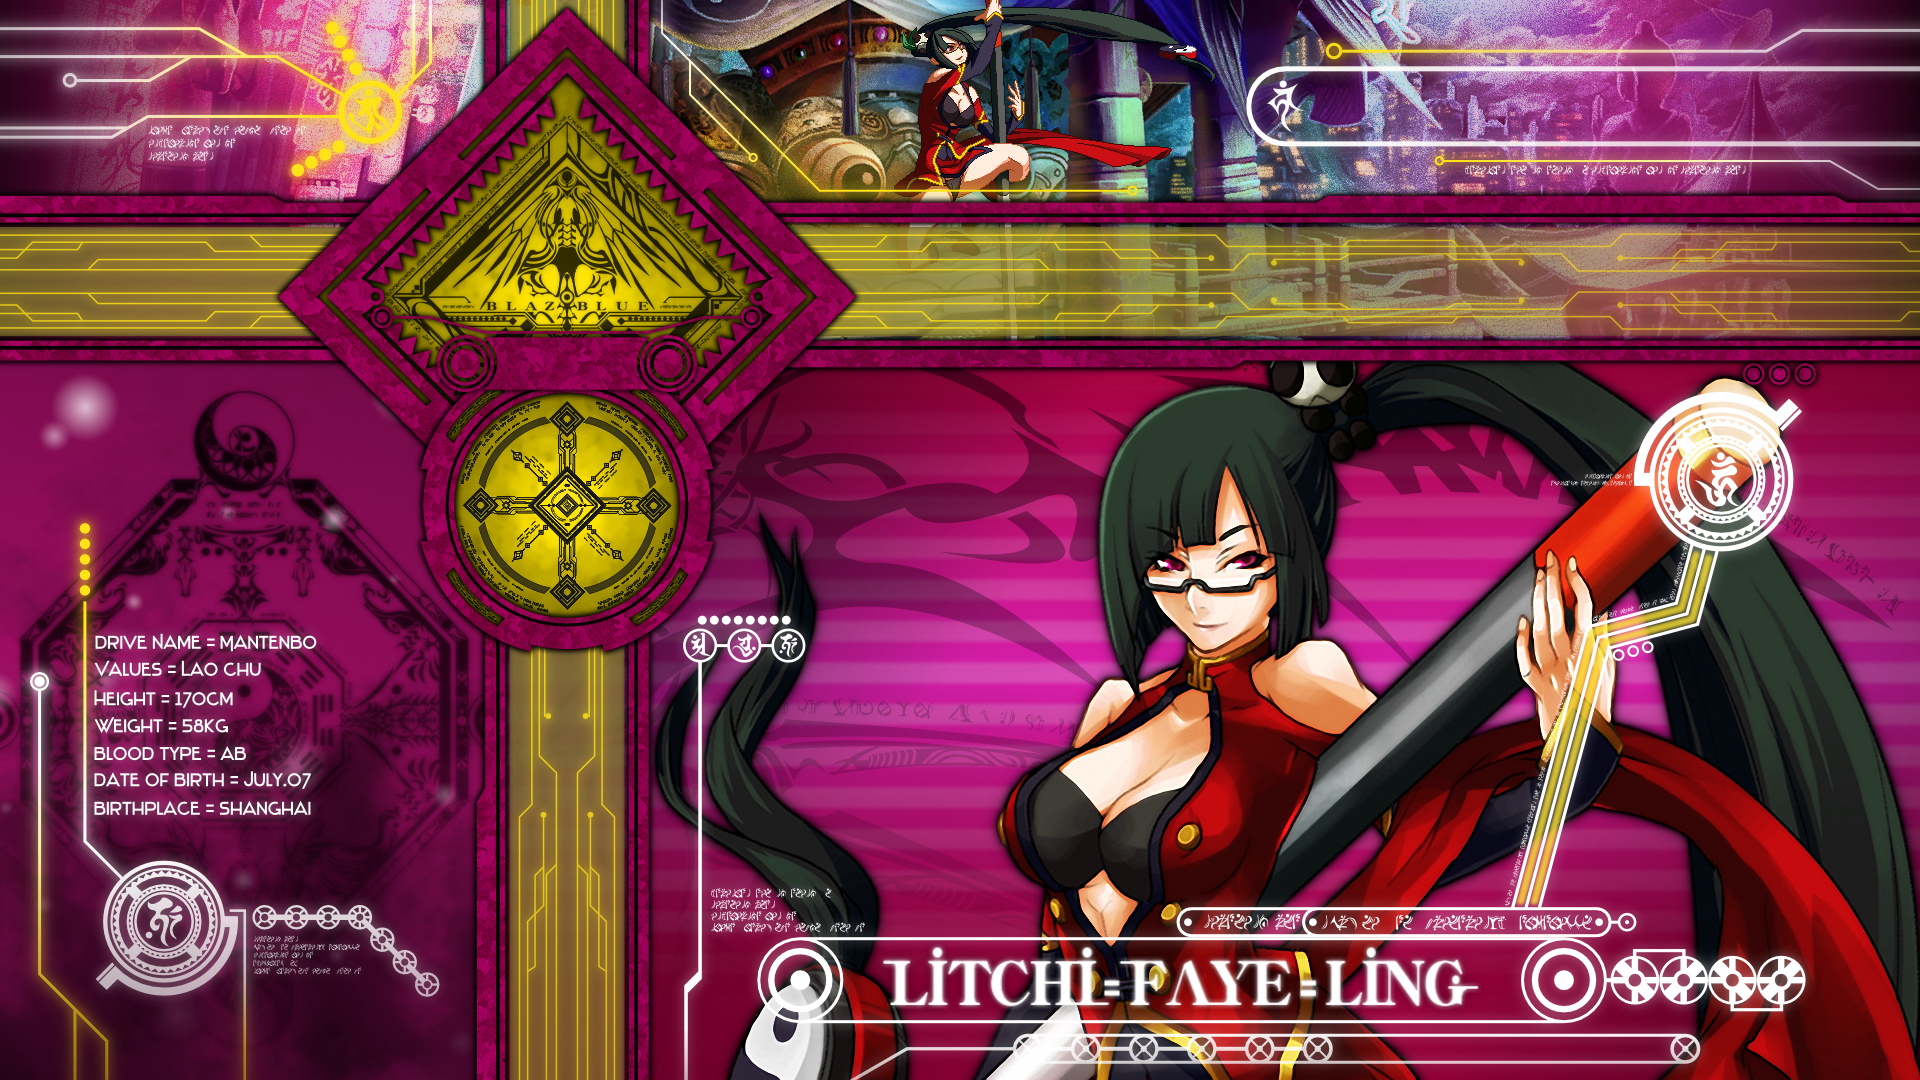 BlazBlue: Continuum Shift character Litchi Faye Ling in a vibrant video game desktop wallpaper.